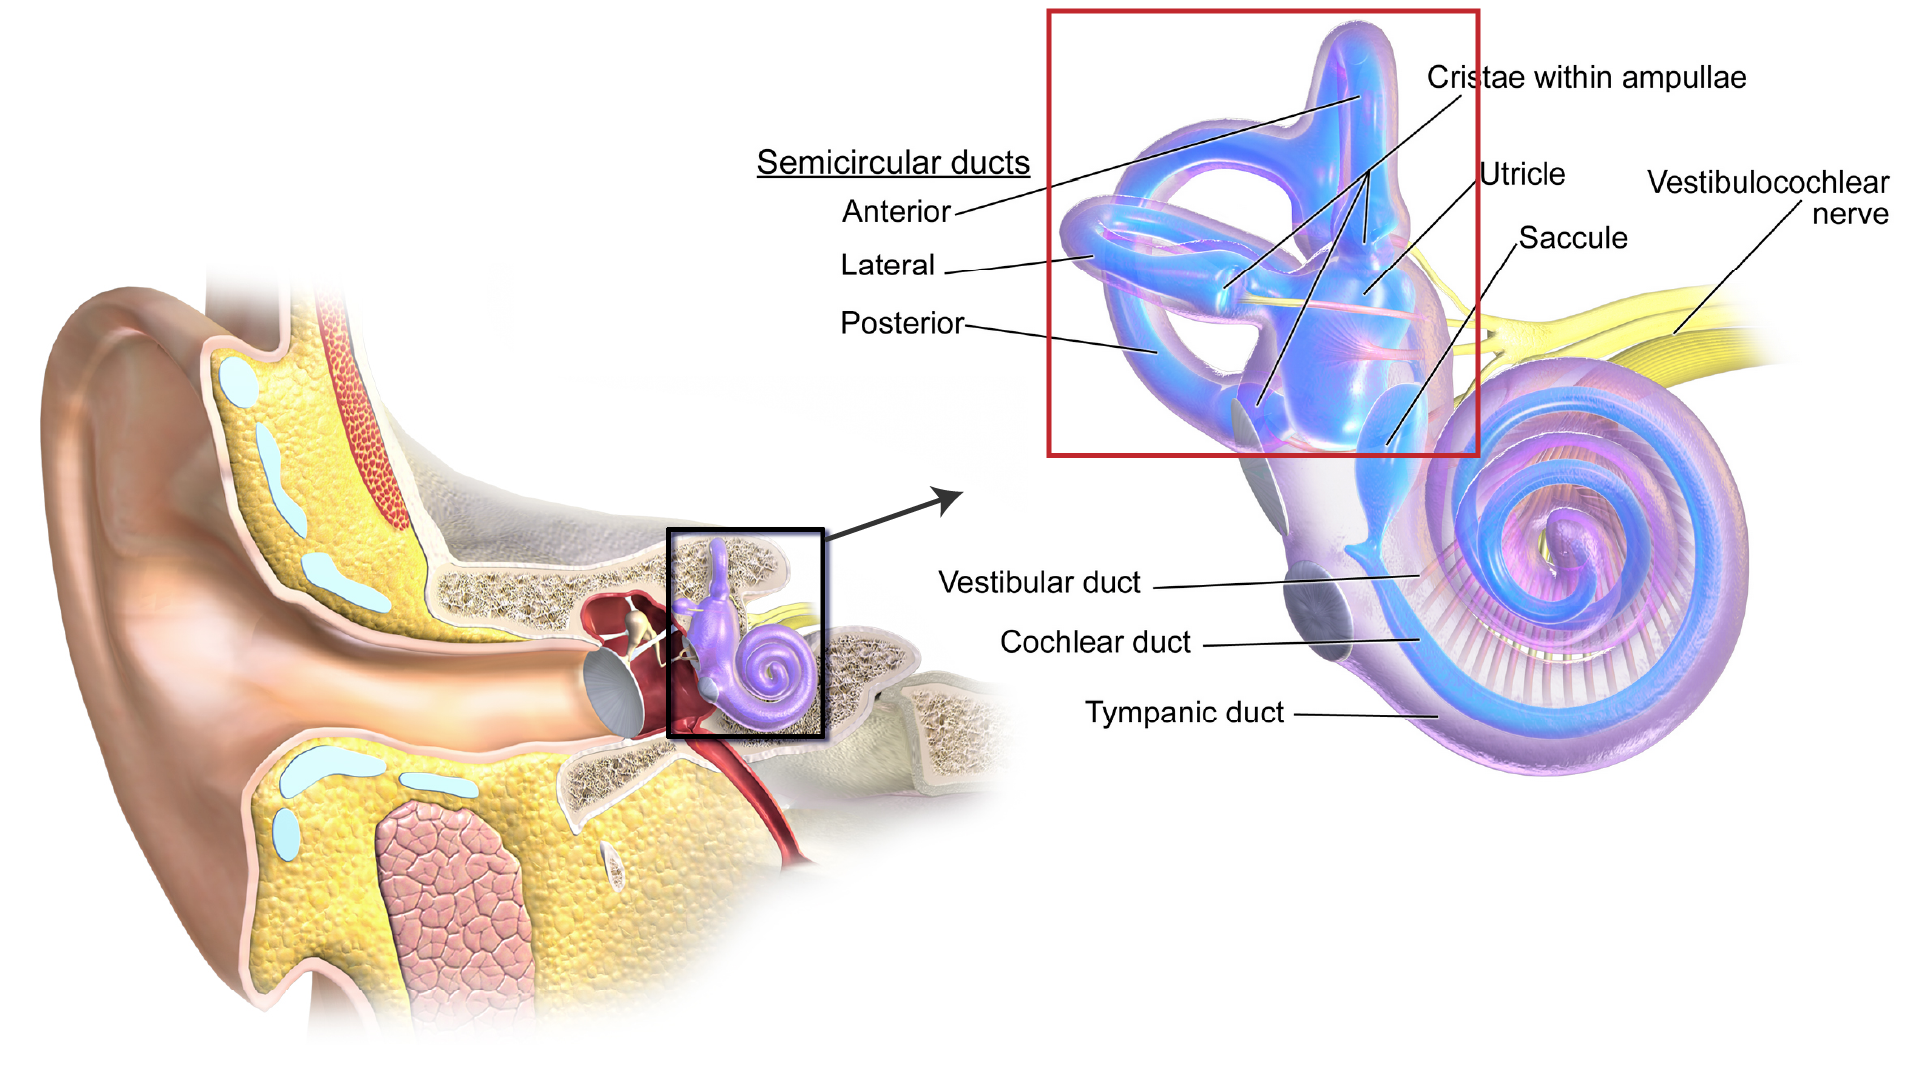 The vestibular organ is the collection of tubes in the red box. Source: Blausen.com staff (2014). "Medical gallery of Blausen Medical 2014". WikiJournal of Medicine 1 (2). DOI:10.15347/wjm/2014.010. ISSN 2002-4436